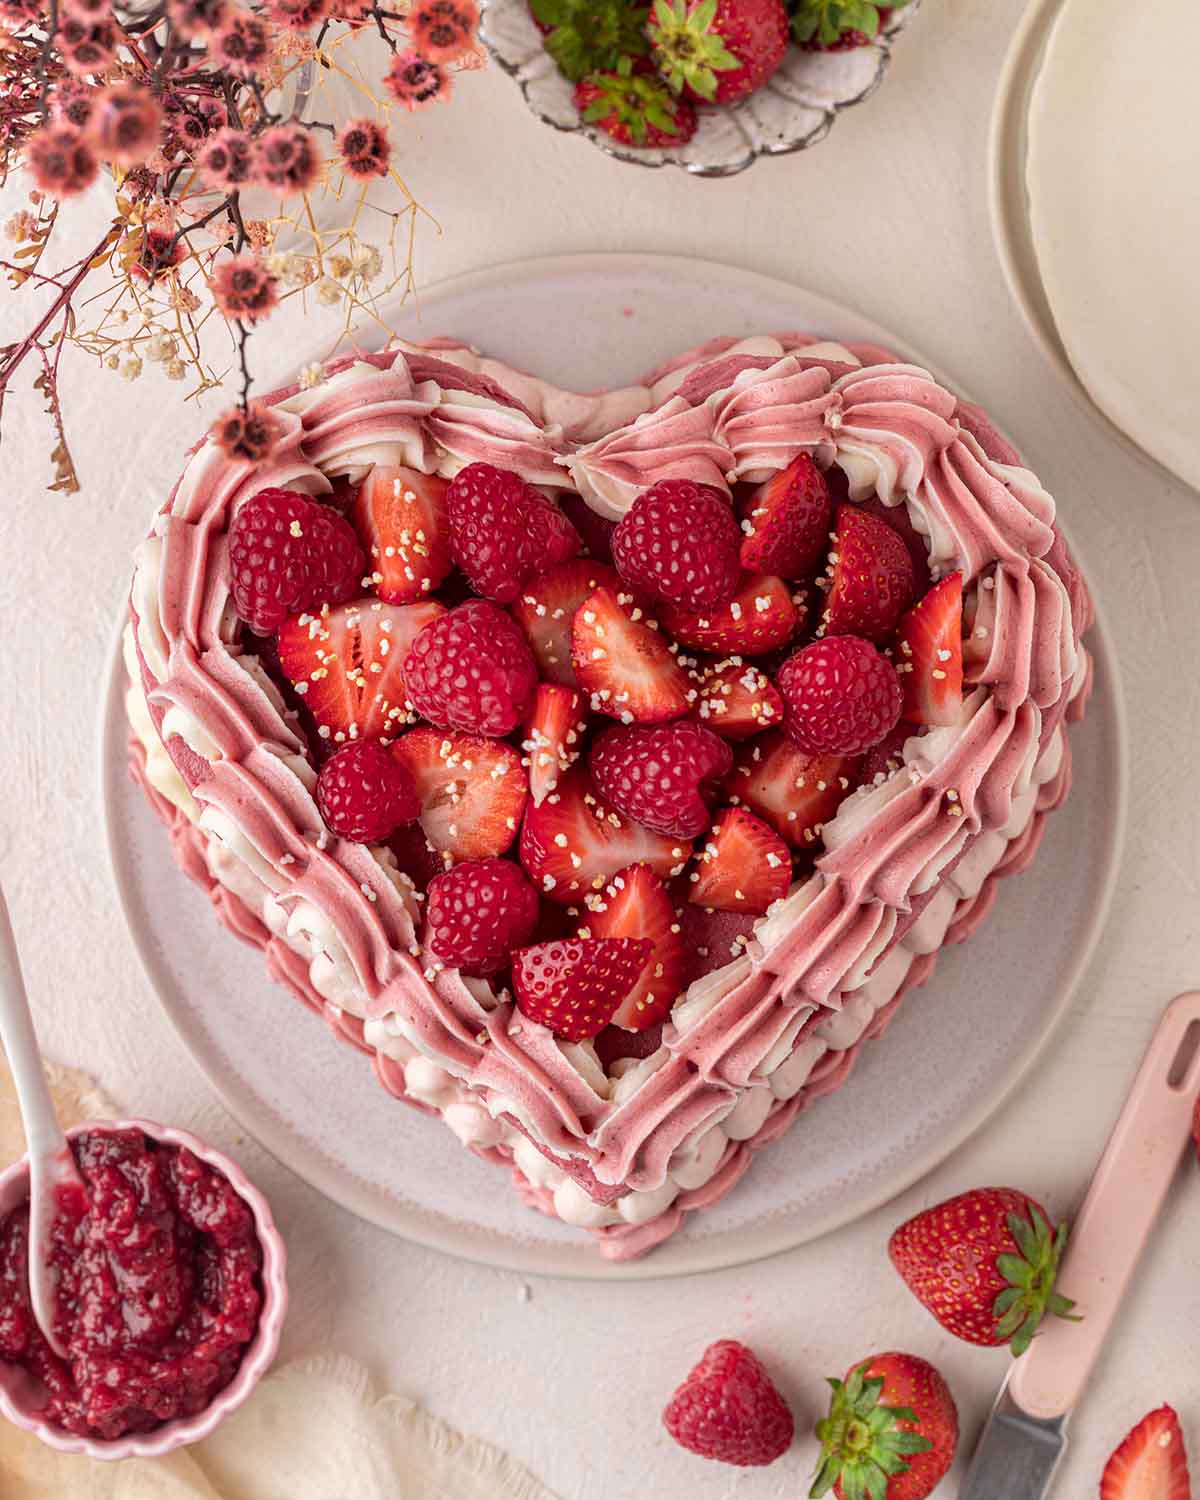 Overhead image of heart cake focusing on the piped pink and white frosting around border of cake and topping of fresh raspberries and strawberries.